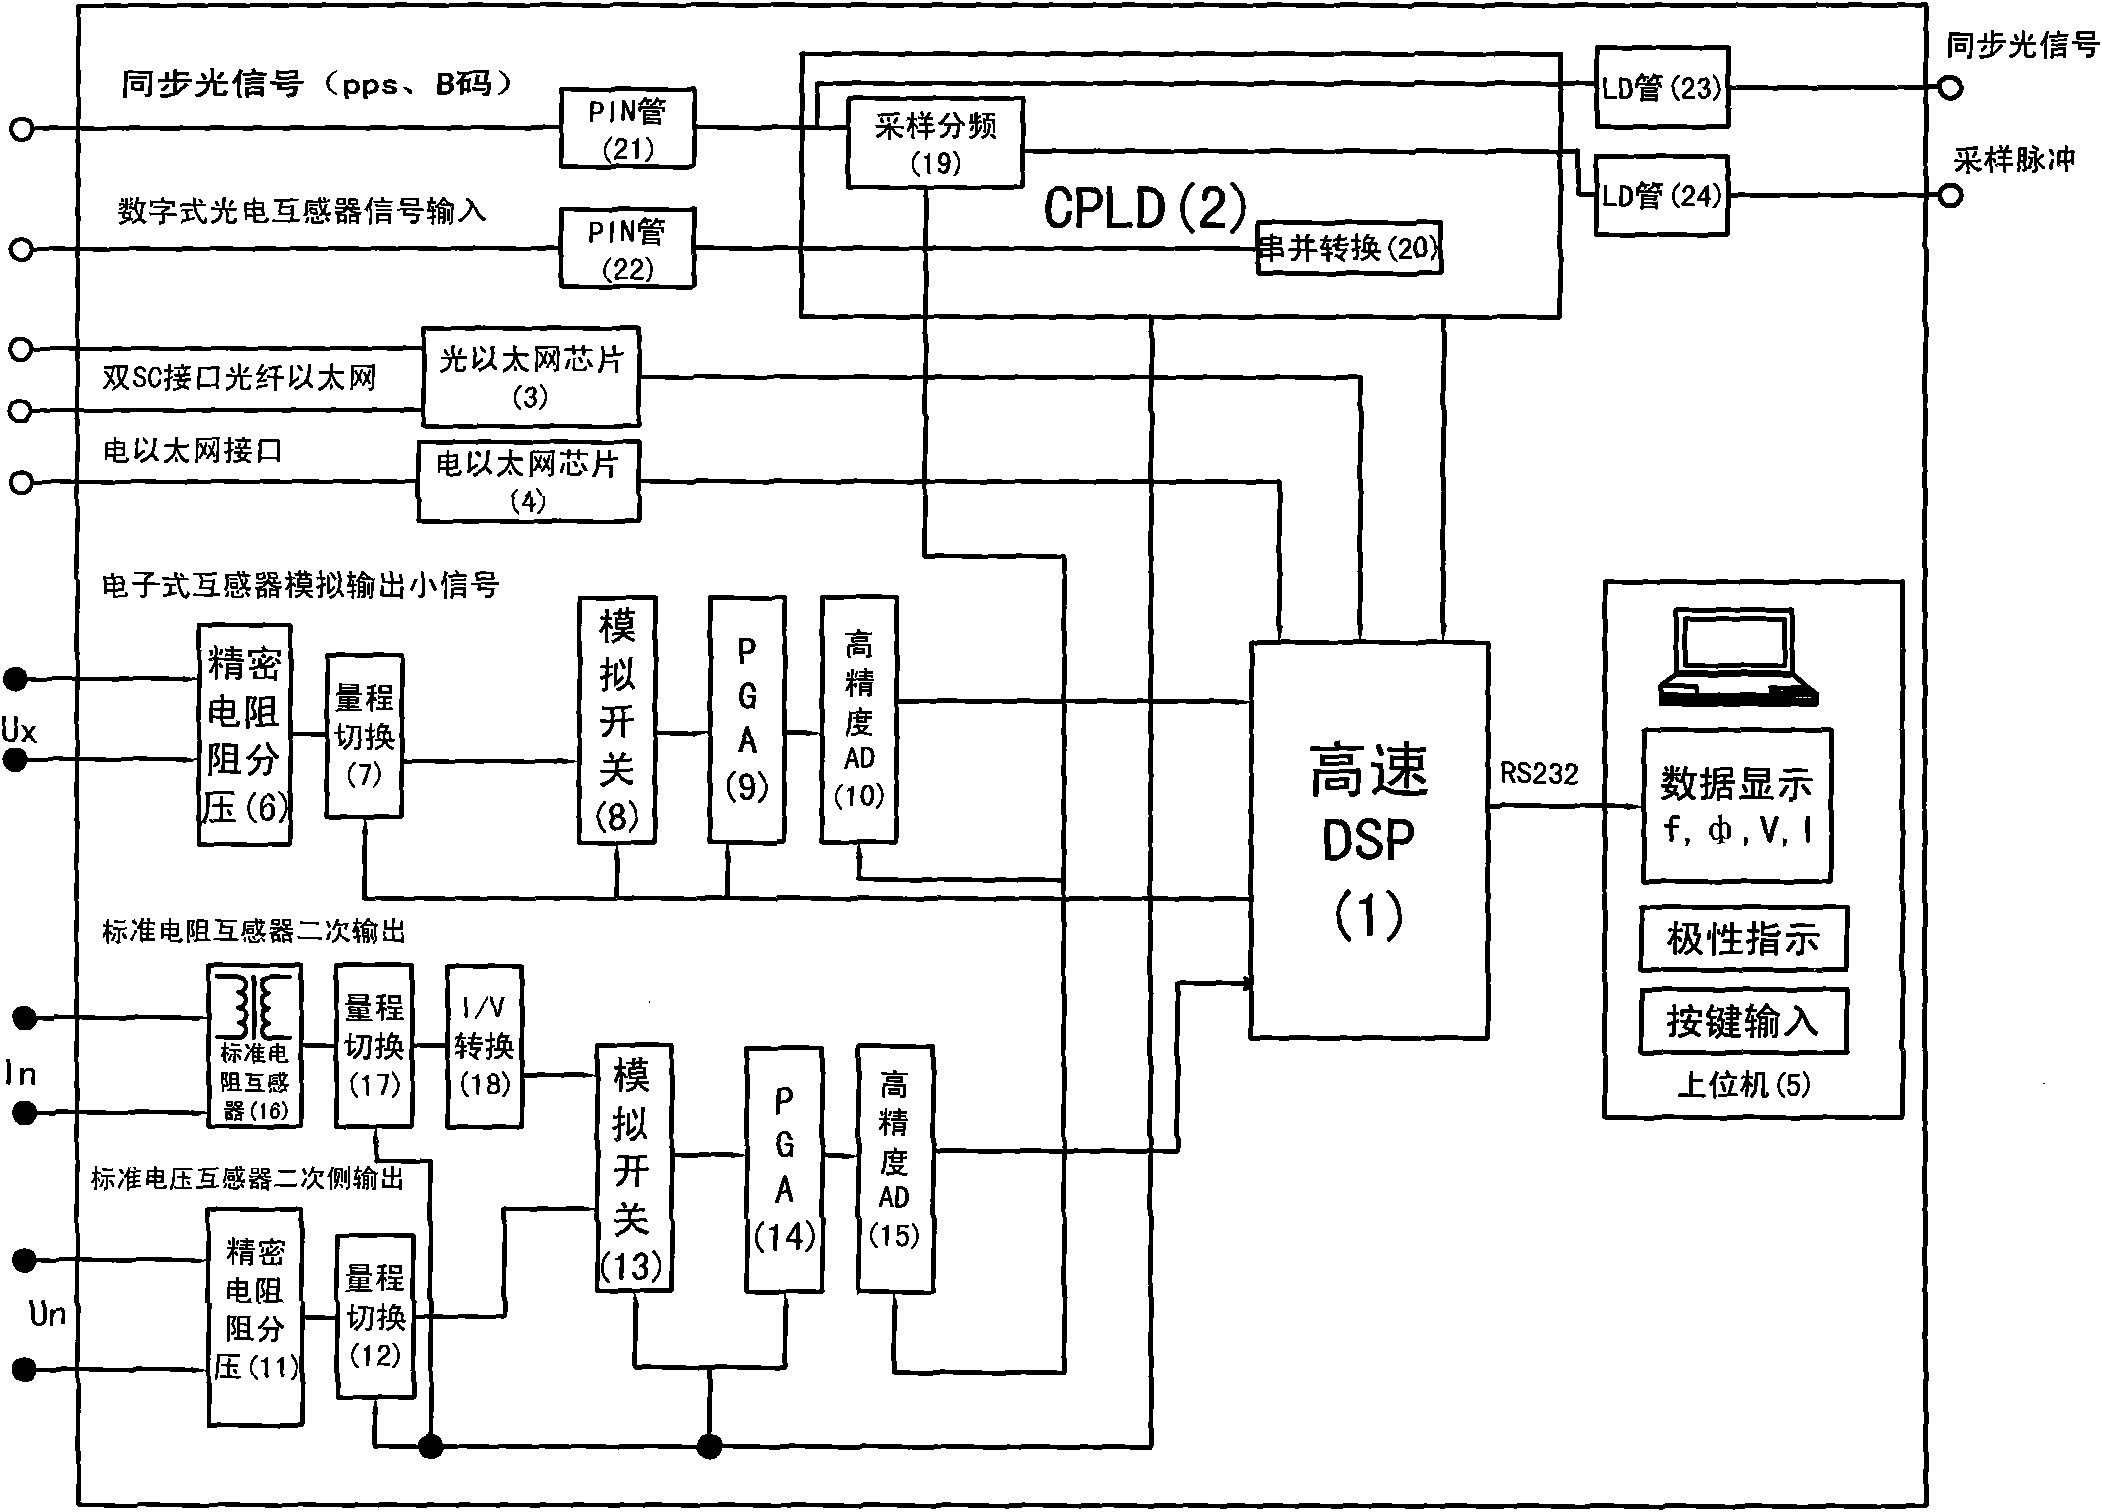 Embedded check meter for electronic mutual inductor